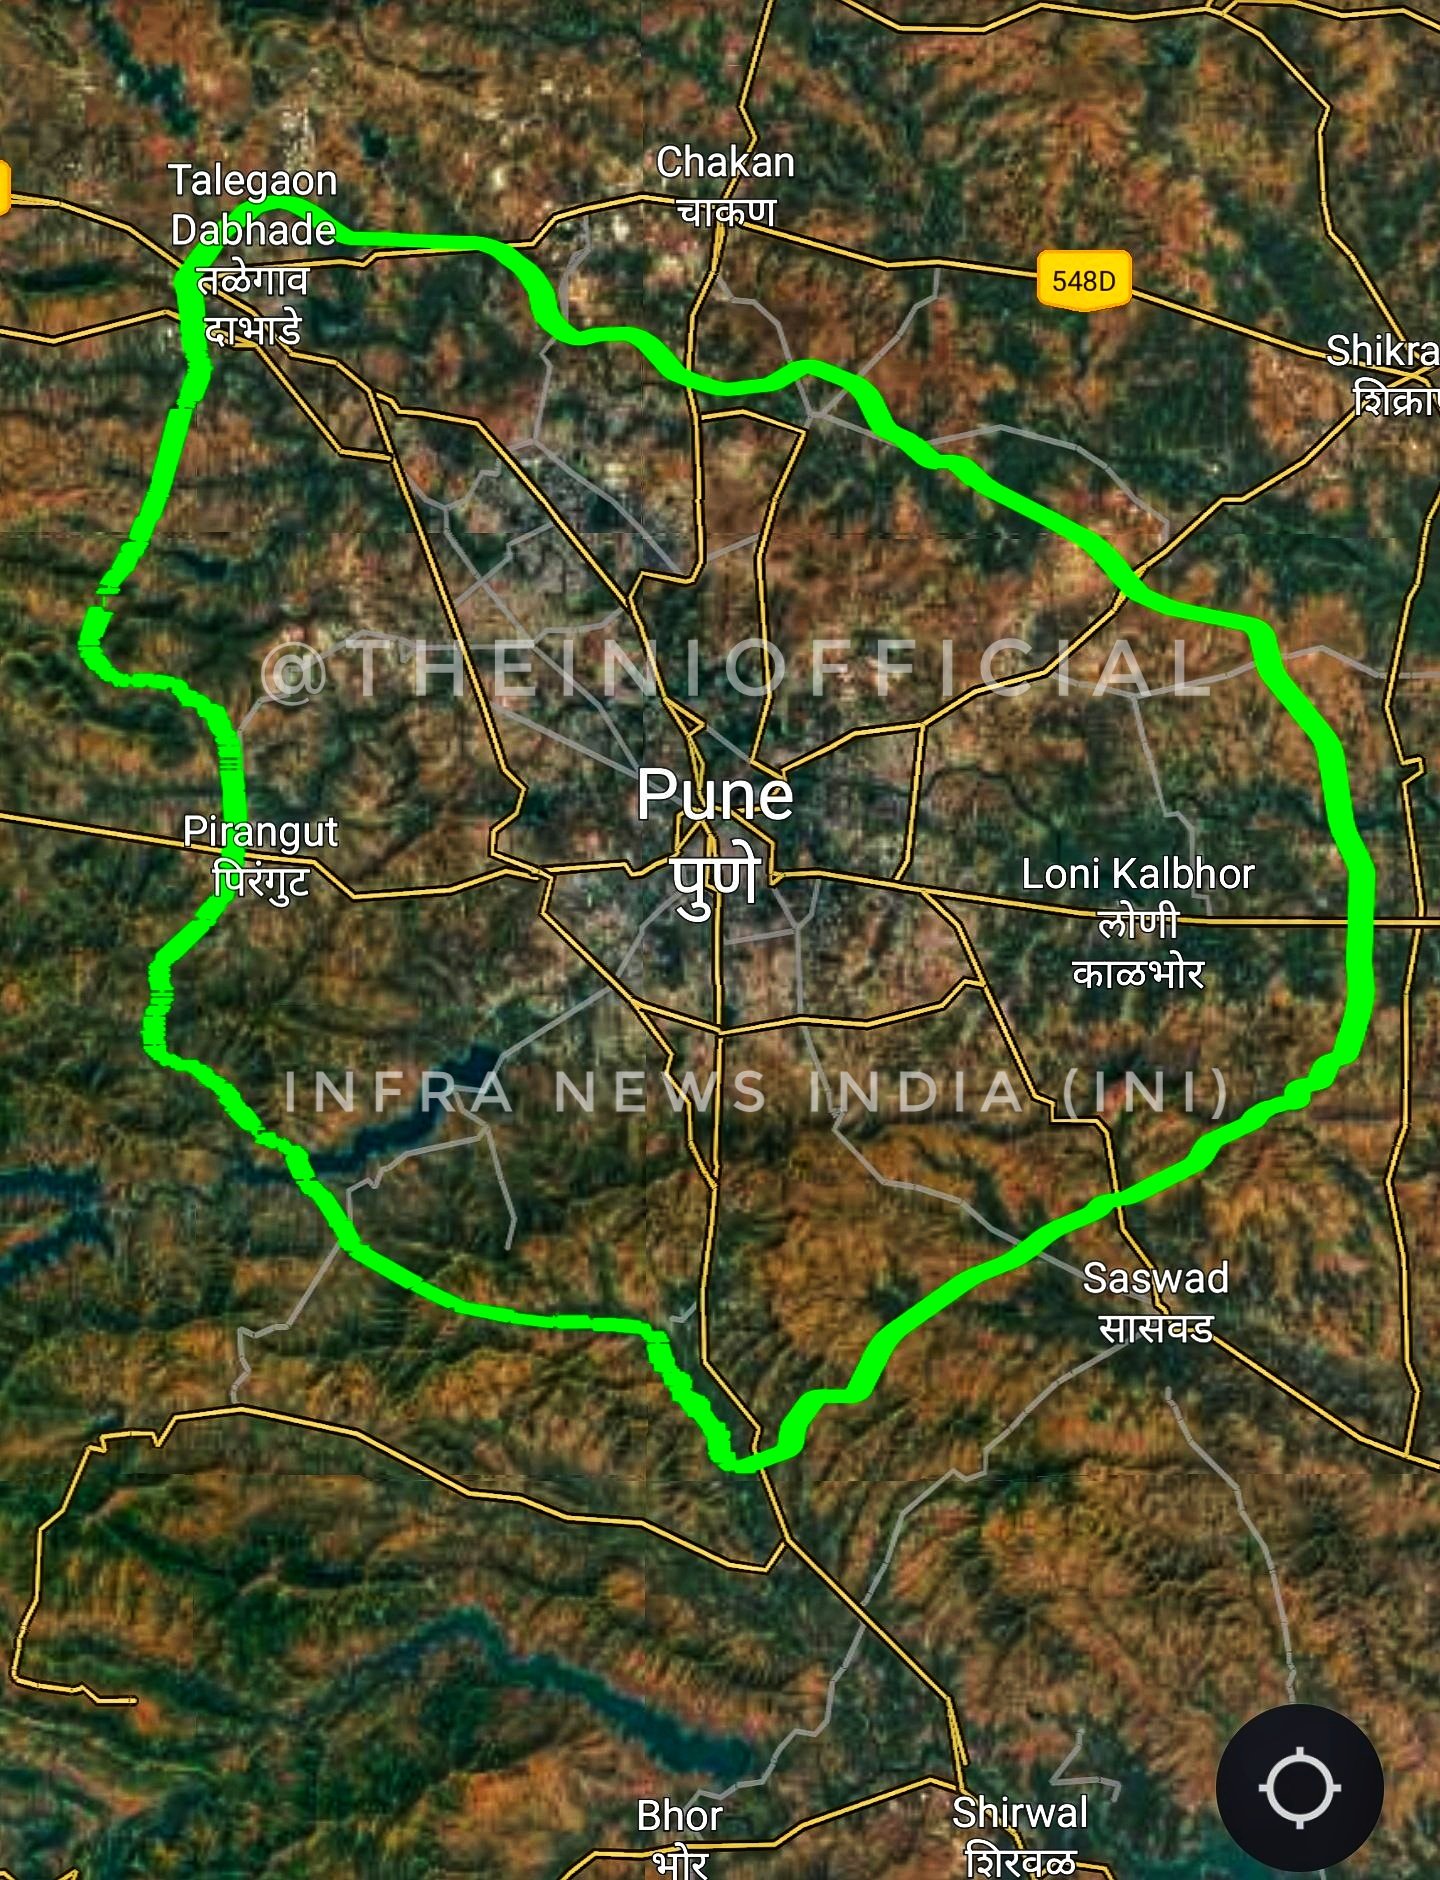 Maharashtra's Ambitious Plan: Five Logistics Hubs along Pune ring road to  boost agriculture and manufacturing